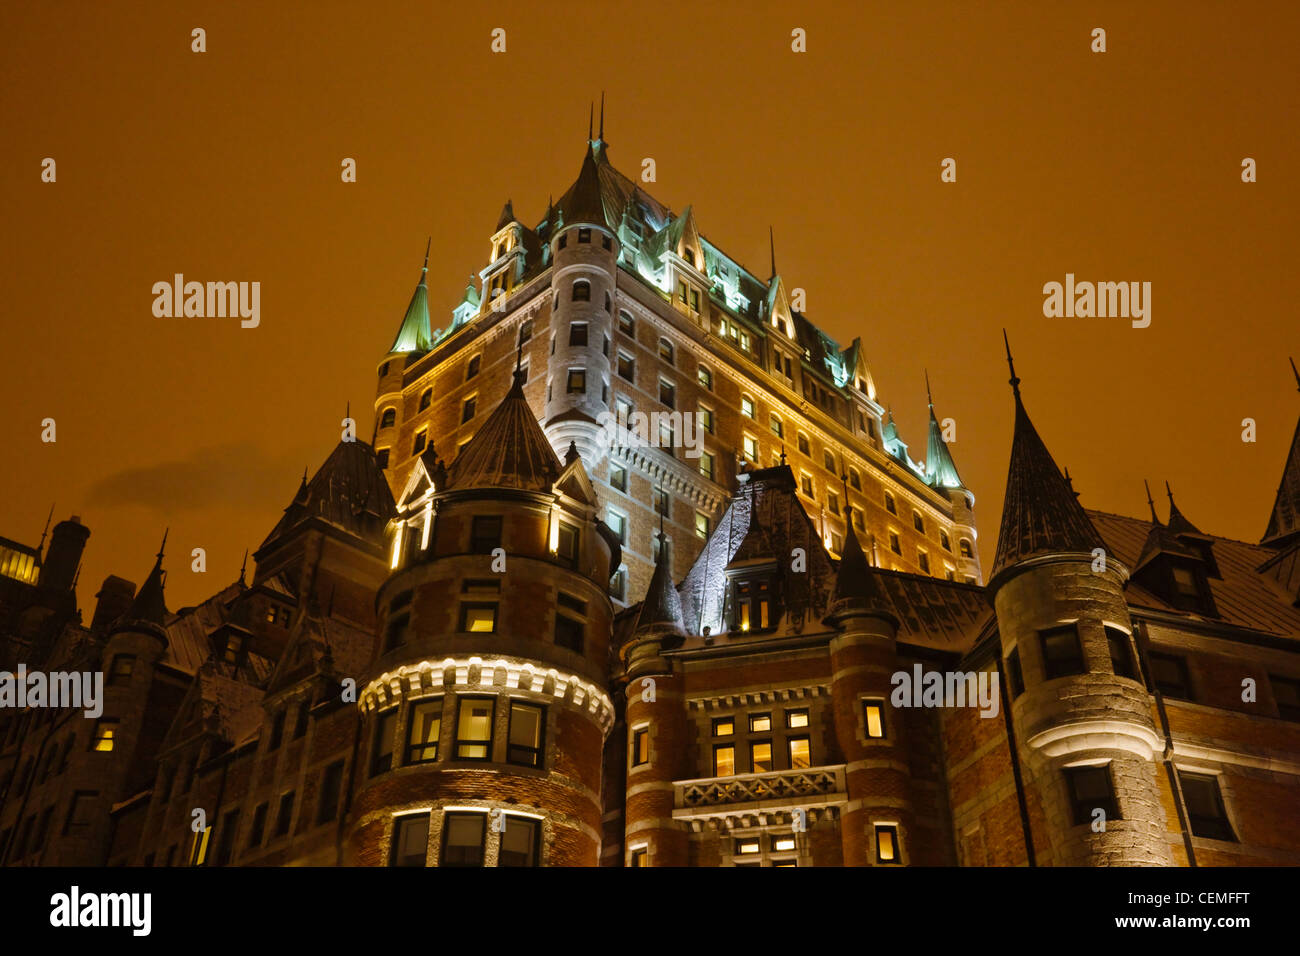 Night view of Chateau Frontenac Hotel, Quebec City, Canada Stock Photo